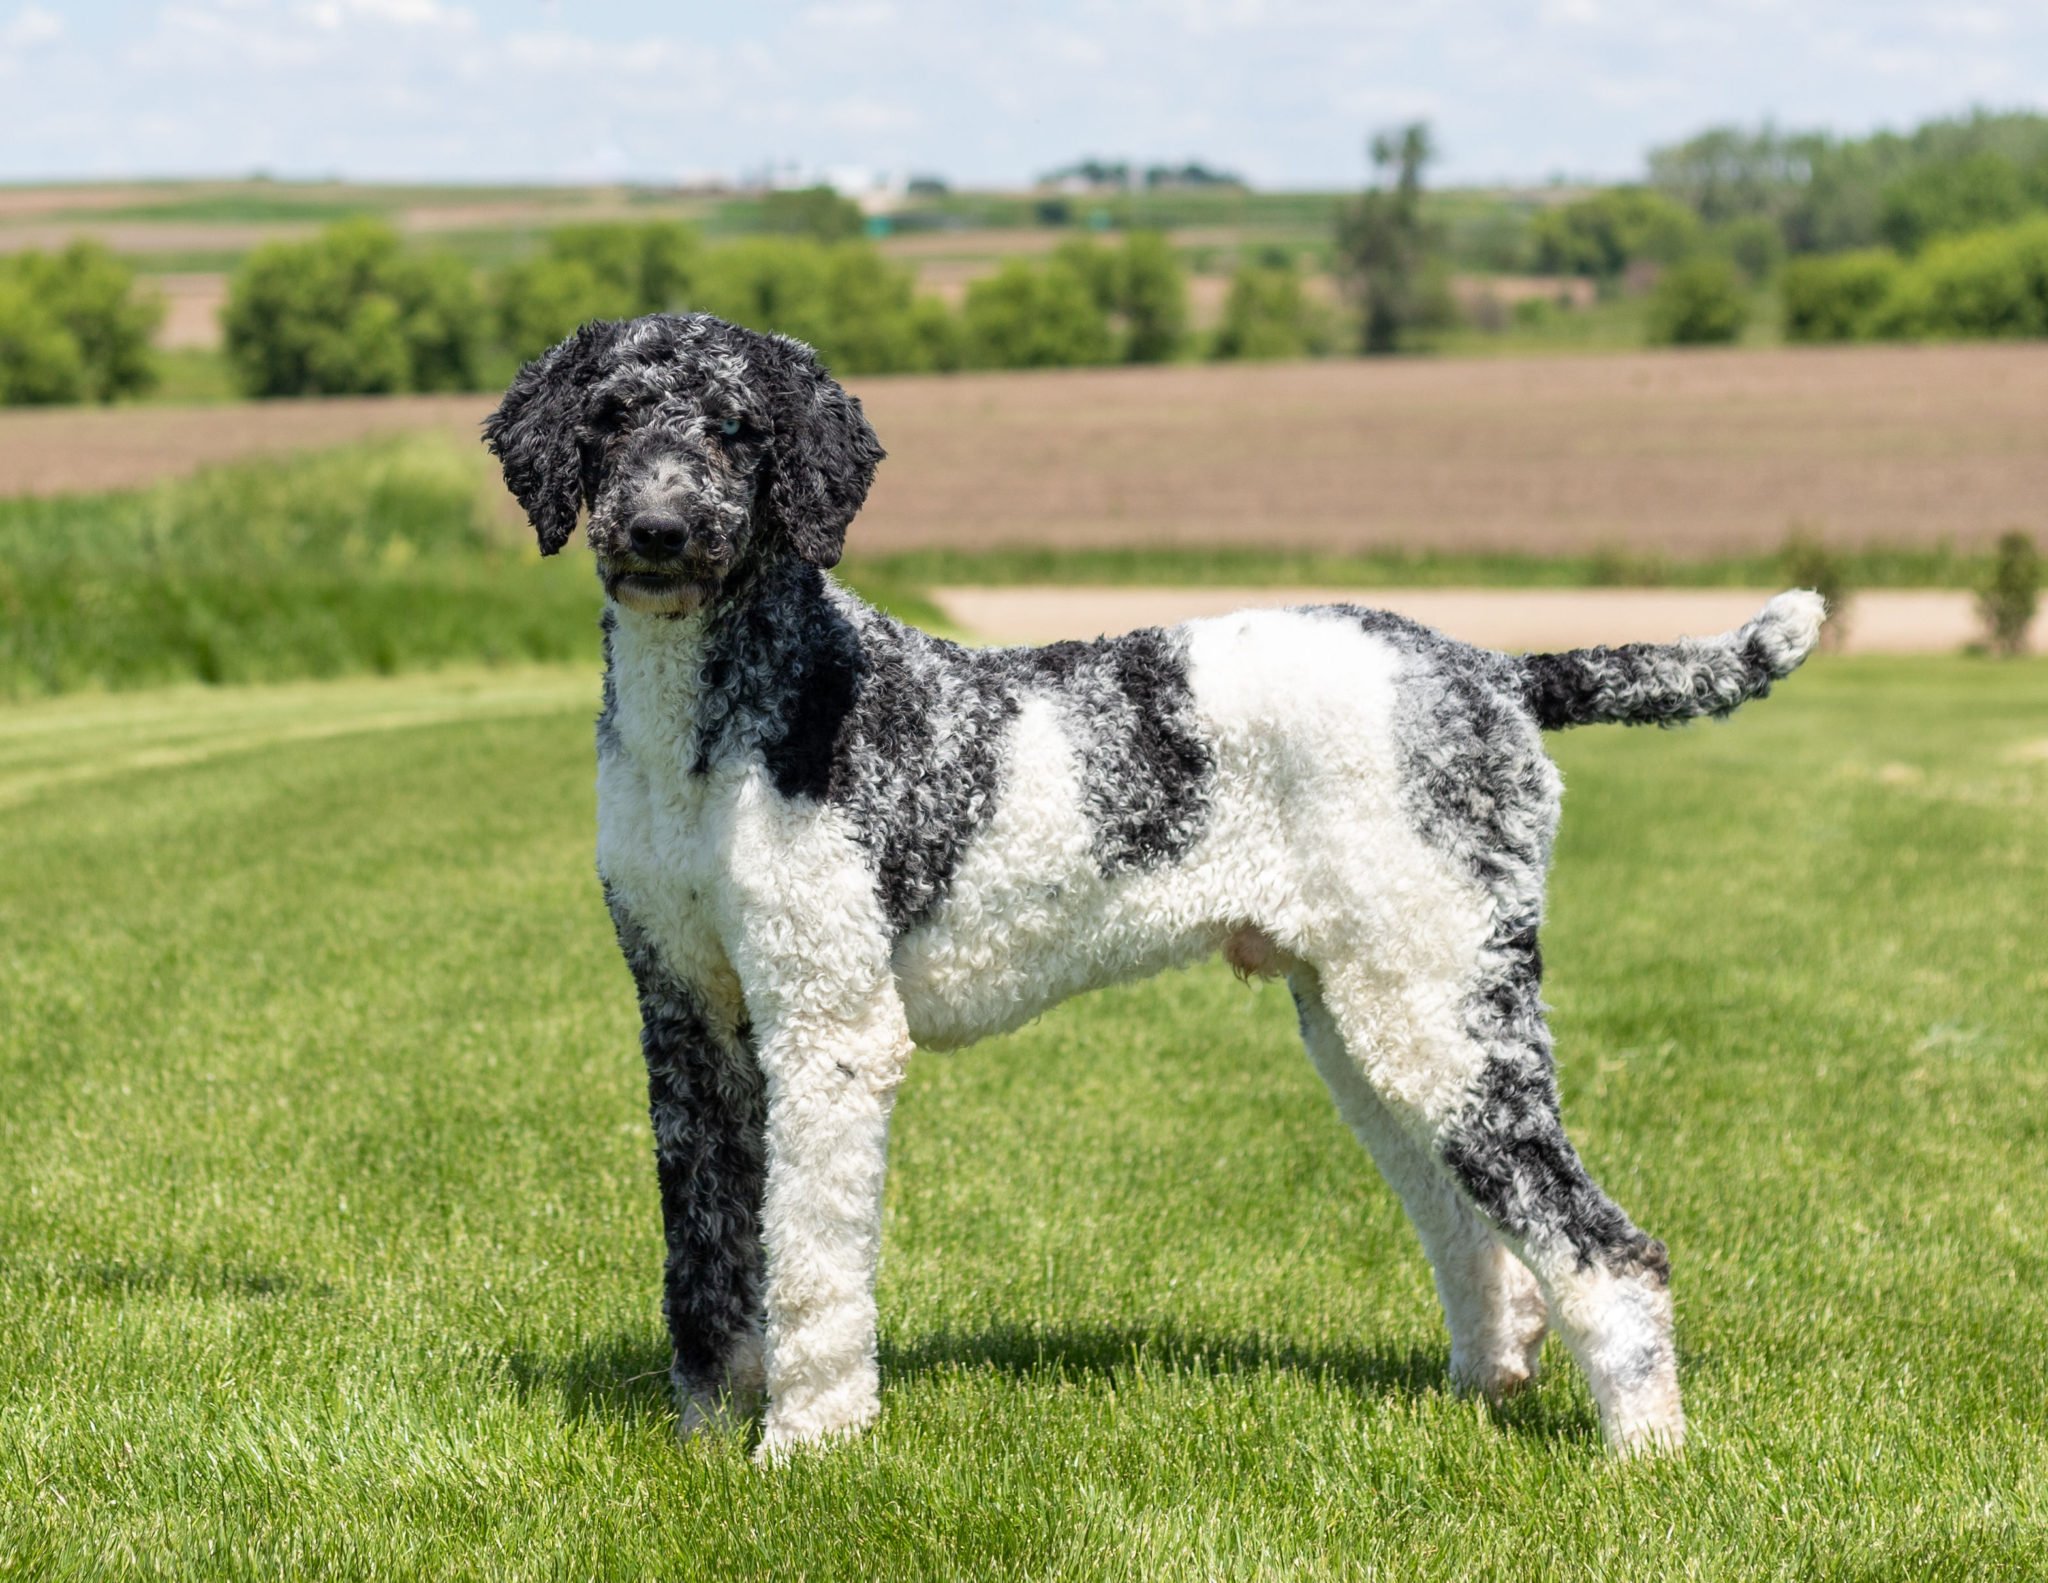 A litter of Standard Goldendoodles raised in Iowa by Poodles 2 Doodles